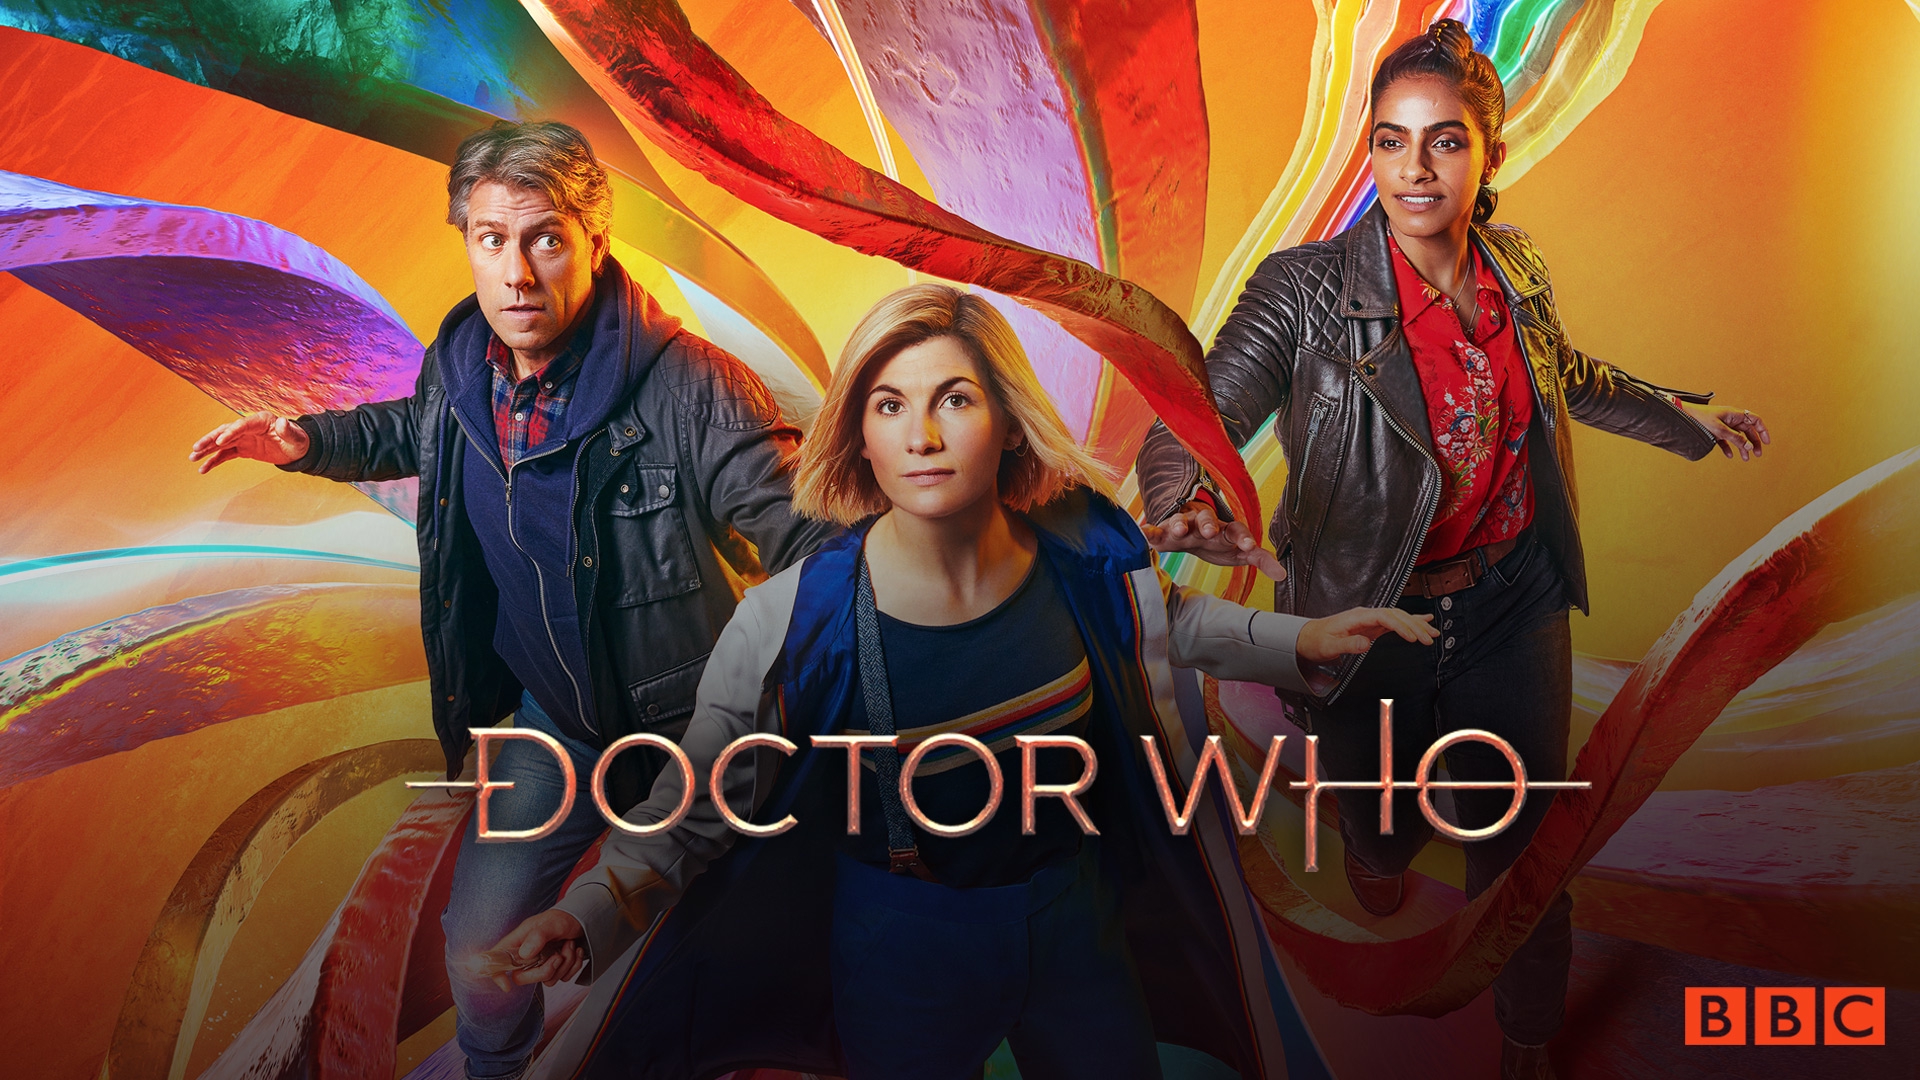 Watch Doctor Who Online, Stream Seasons 1-13 Now